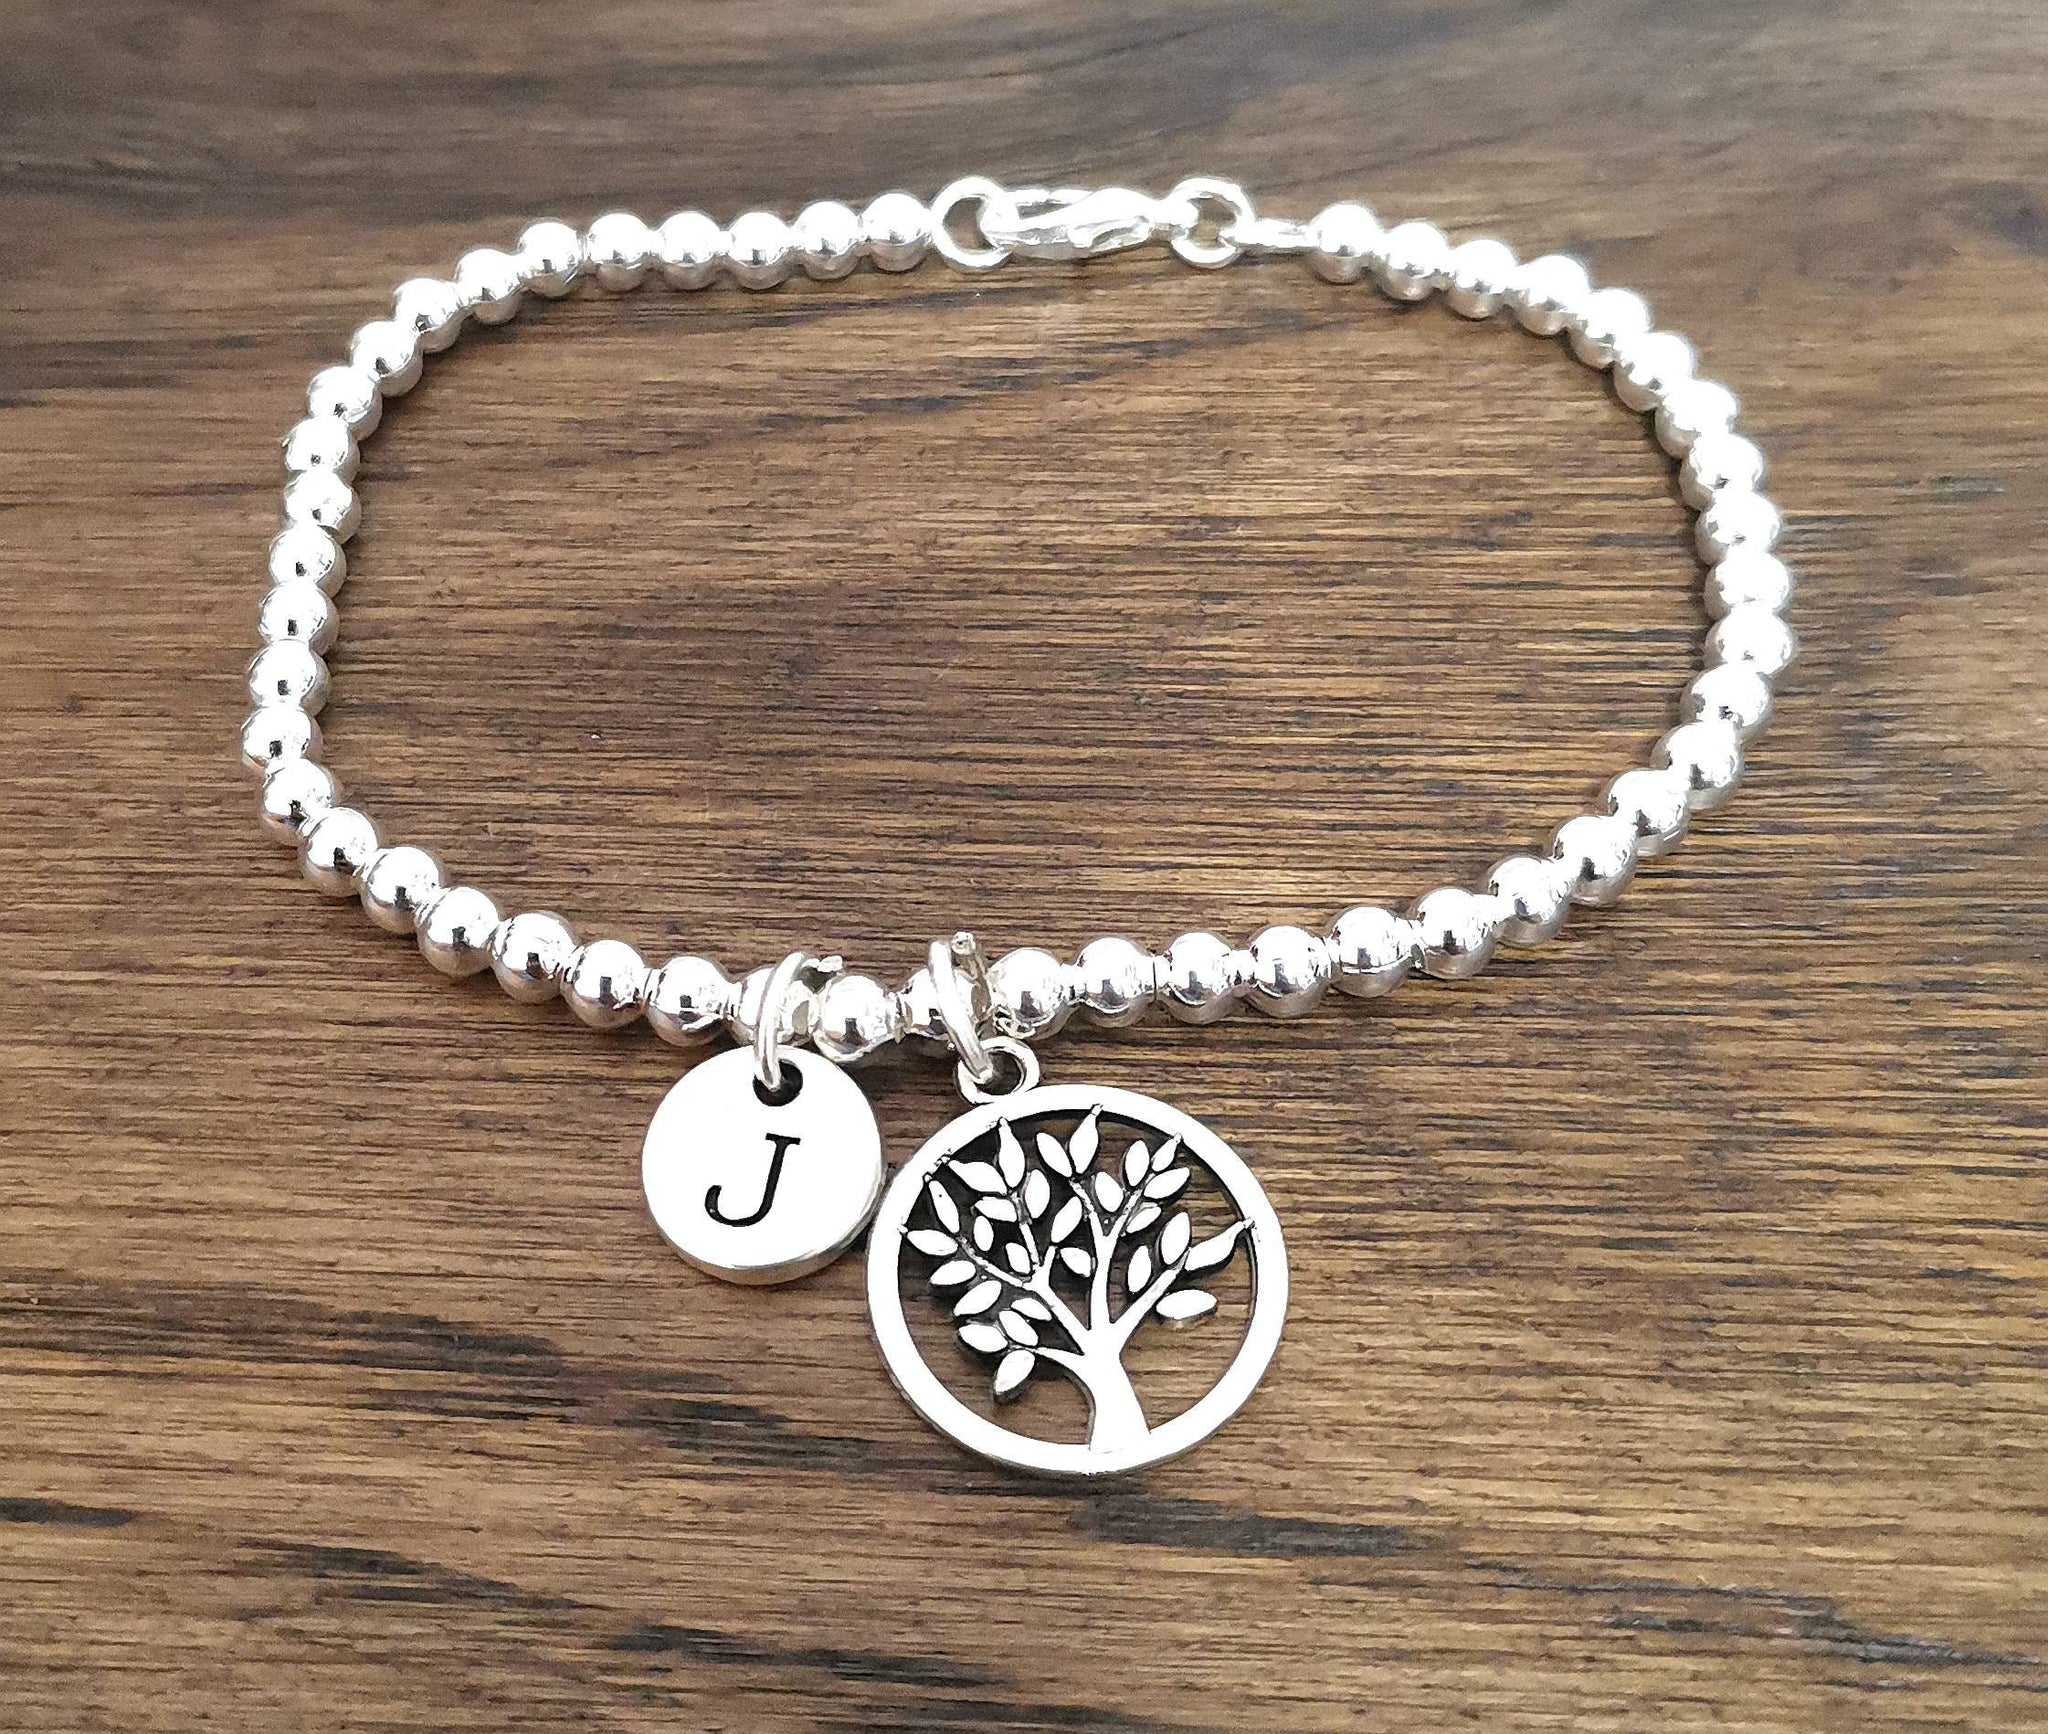 Gifts for women, Gifts for her, Gifts for mom, Gifts for Mum,Tree of life gift, Women Gifts, Mom Gifts, Mum Gifts, Mother bracelet, Tree